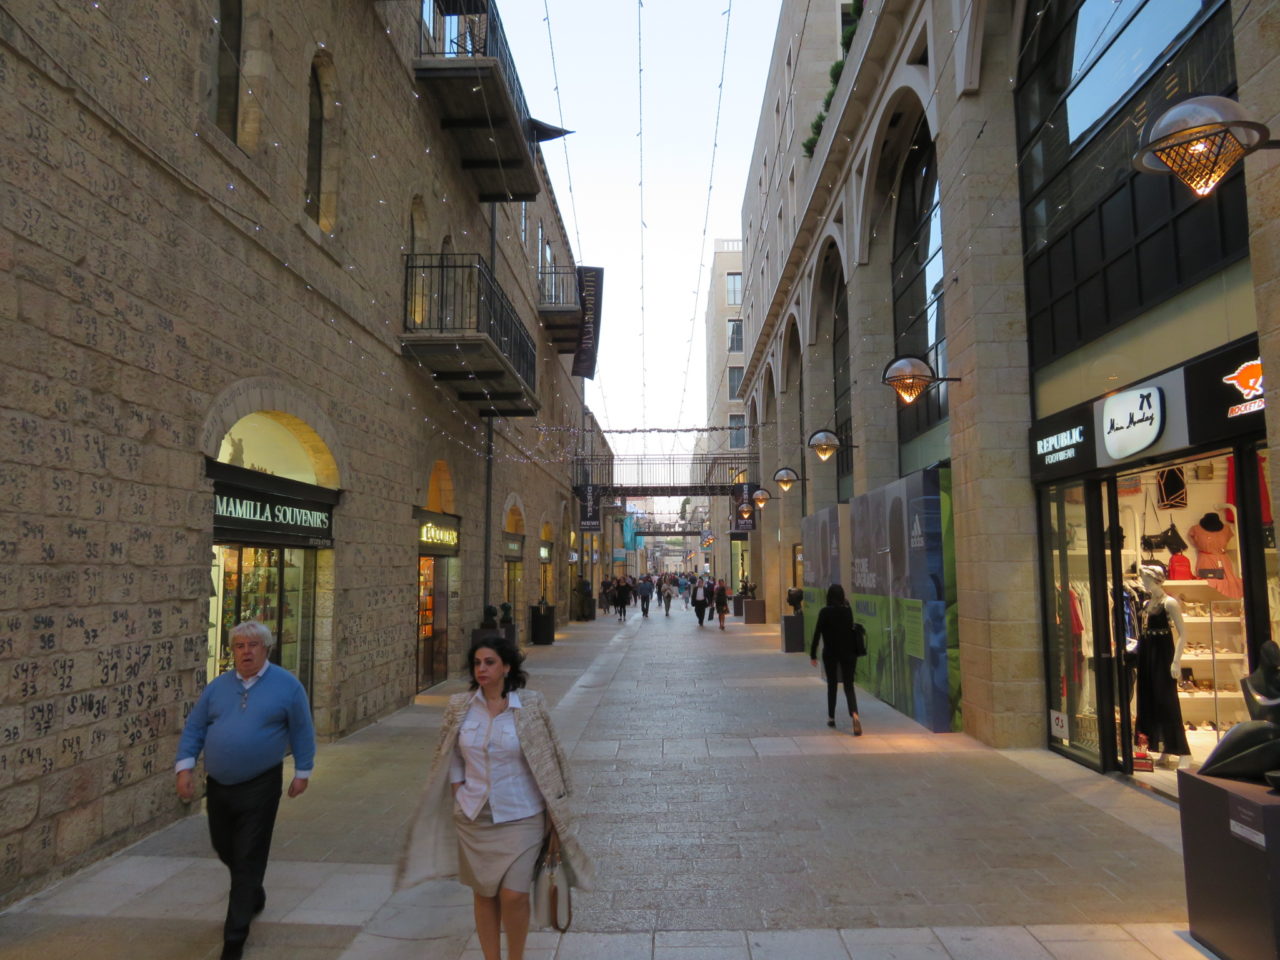 Vacationing in Israel ... Mamilla Mall links the Mamilla Hotel with Jaffa Gate and the Old City of Jerusalem